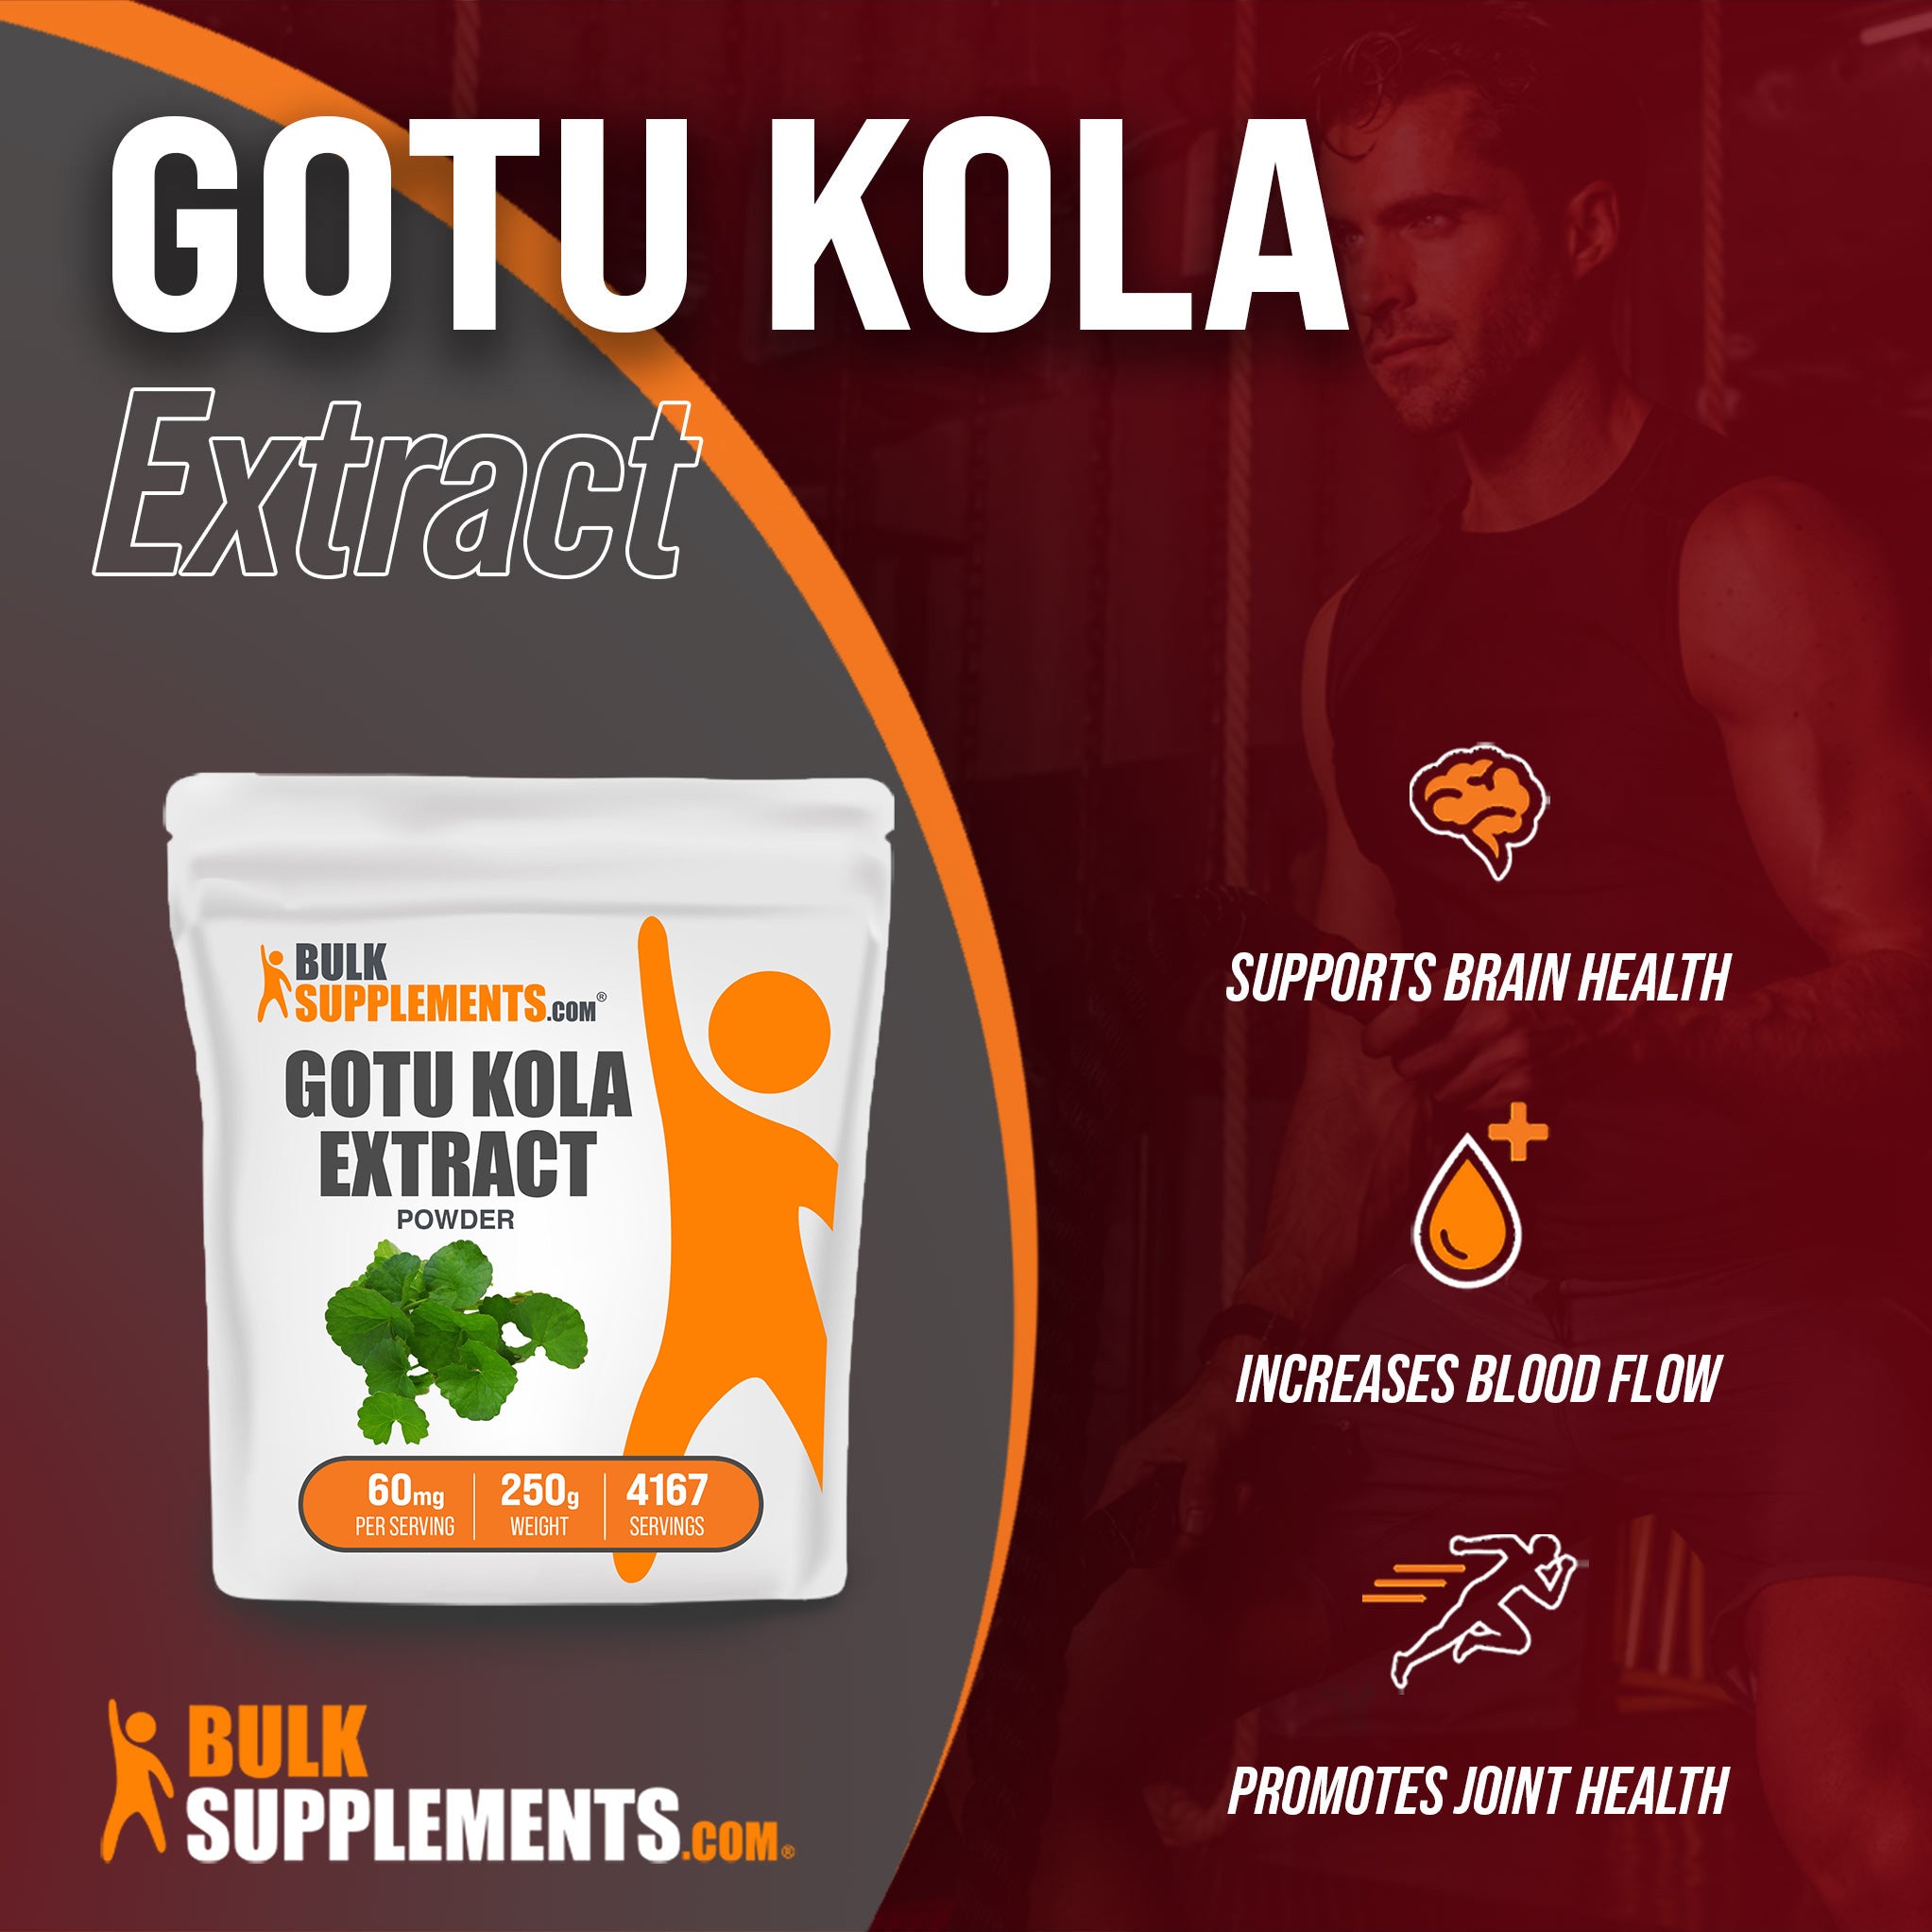 Benefits of Gotu Kola Extract; supports brain health, increases blood flow, promotes joint health